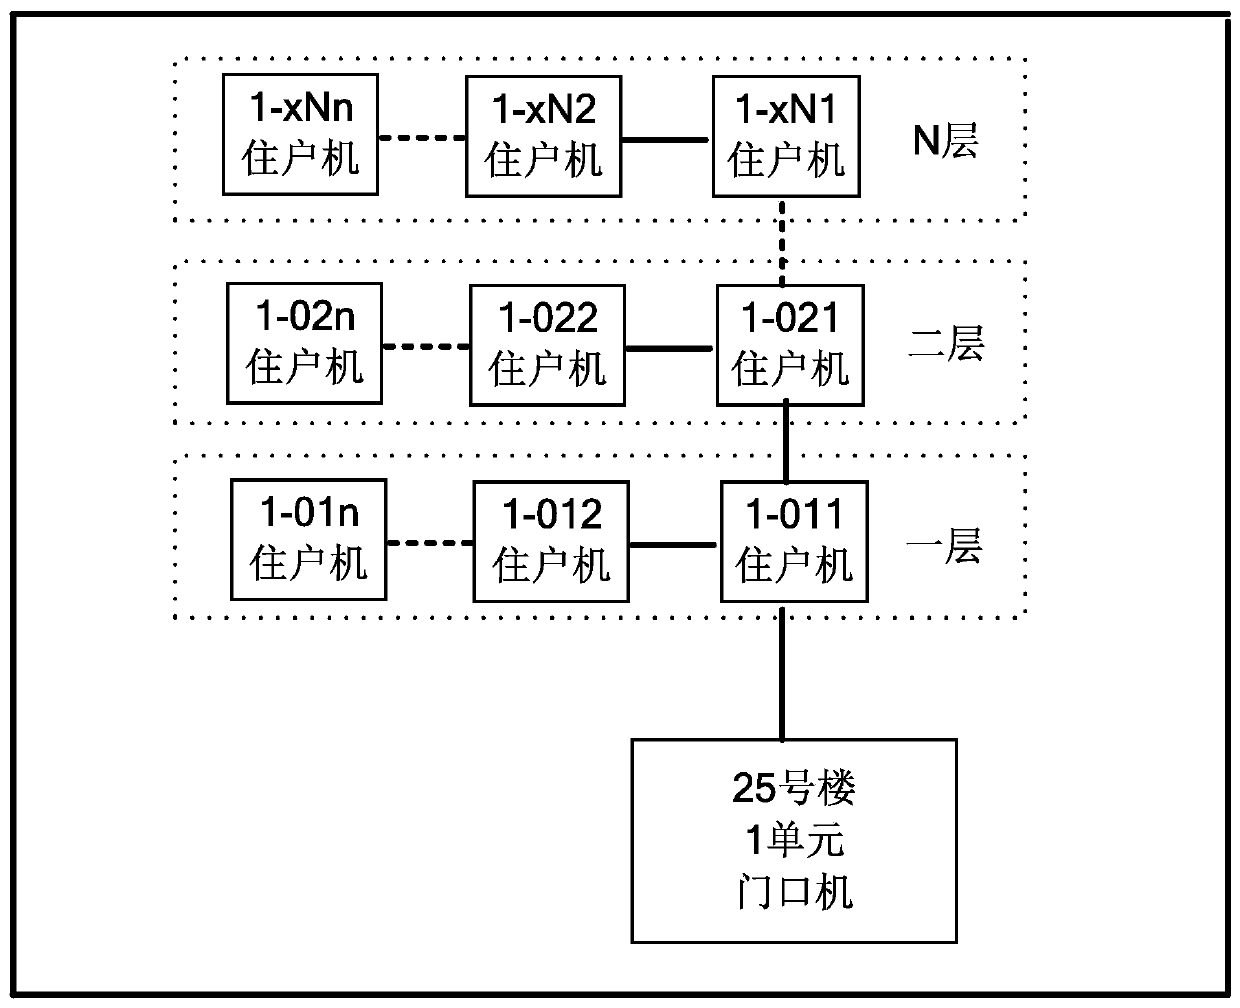 Design method and system for building visual access control based on VLAN-ID specification